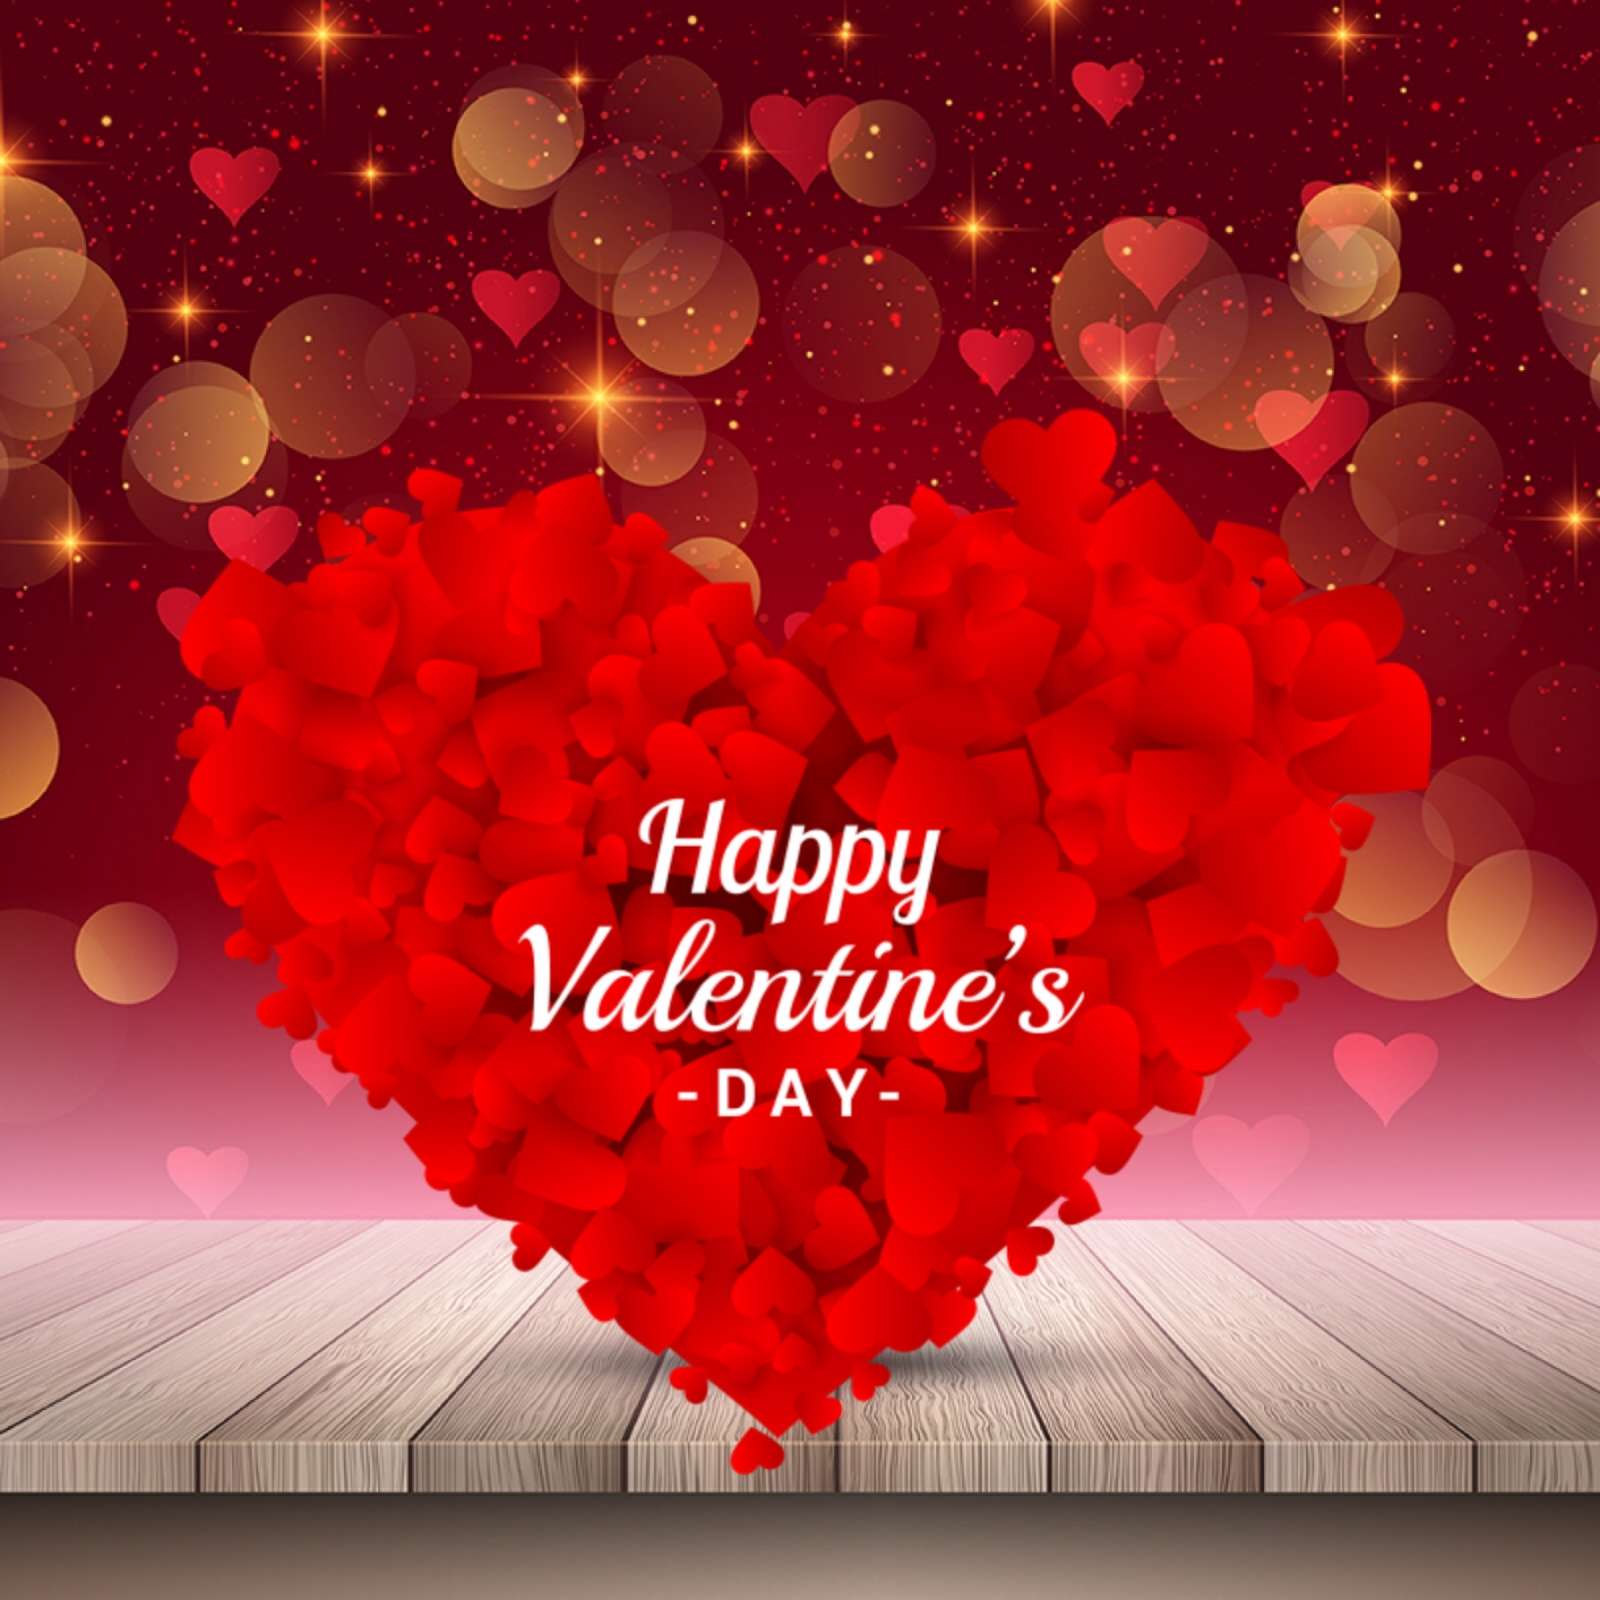 Valentines Day Images Hd Download